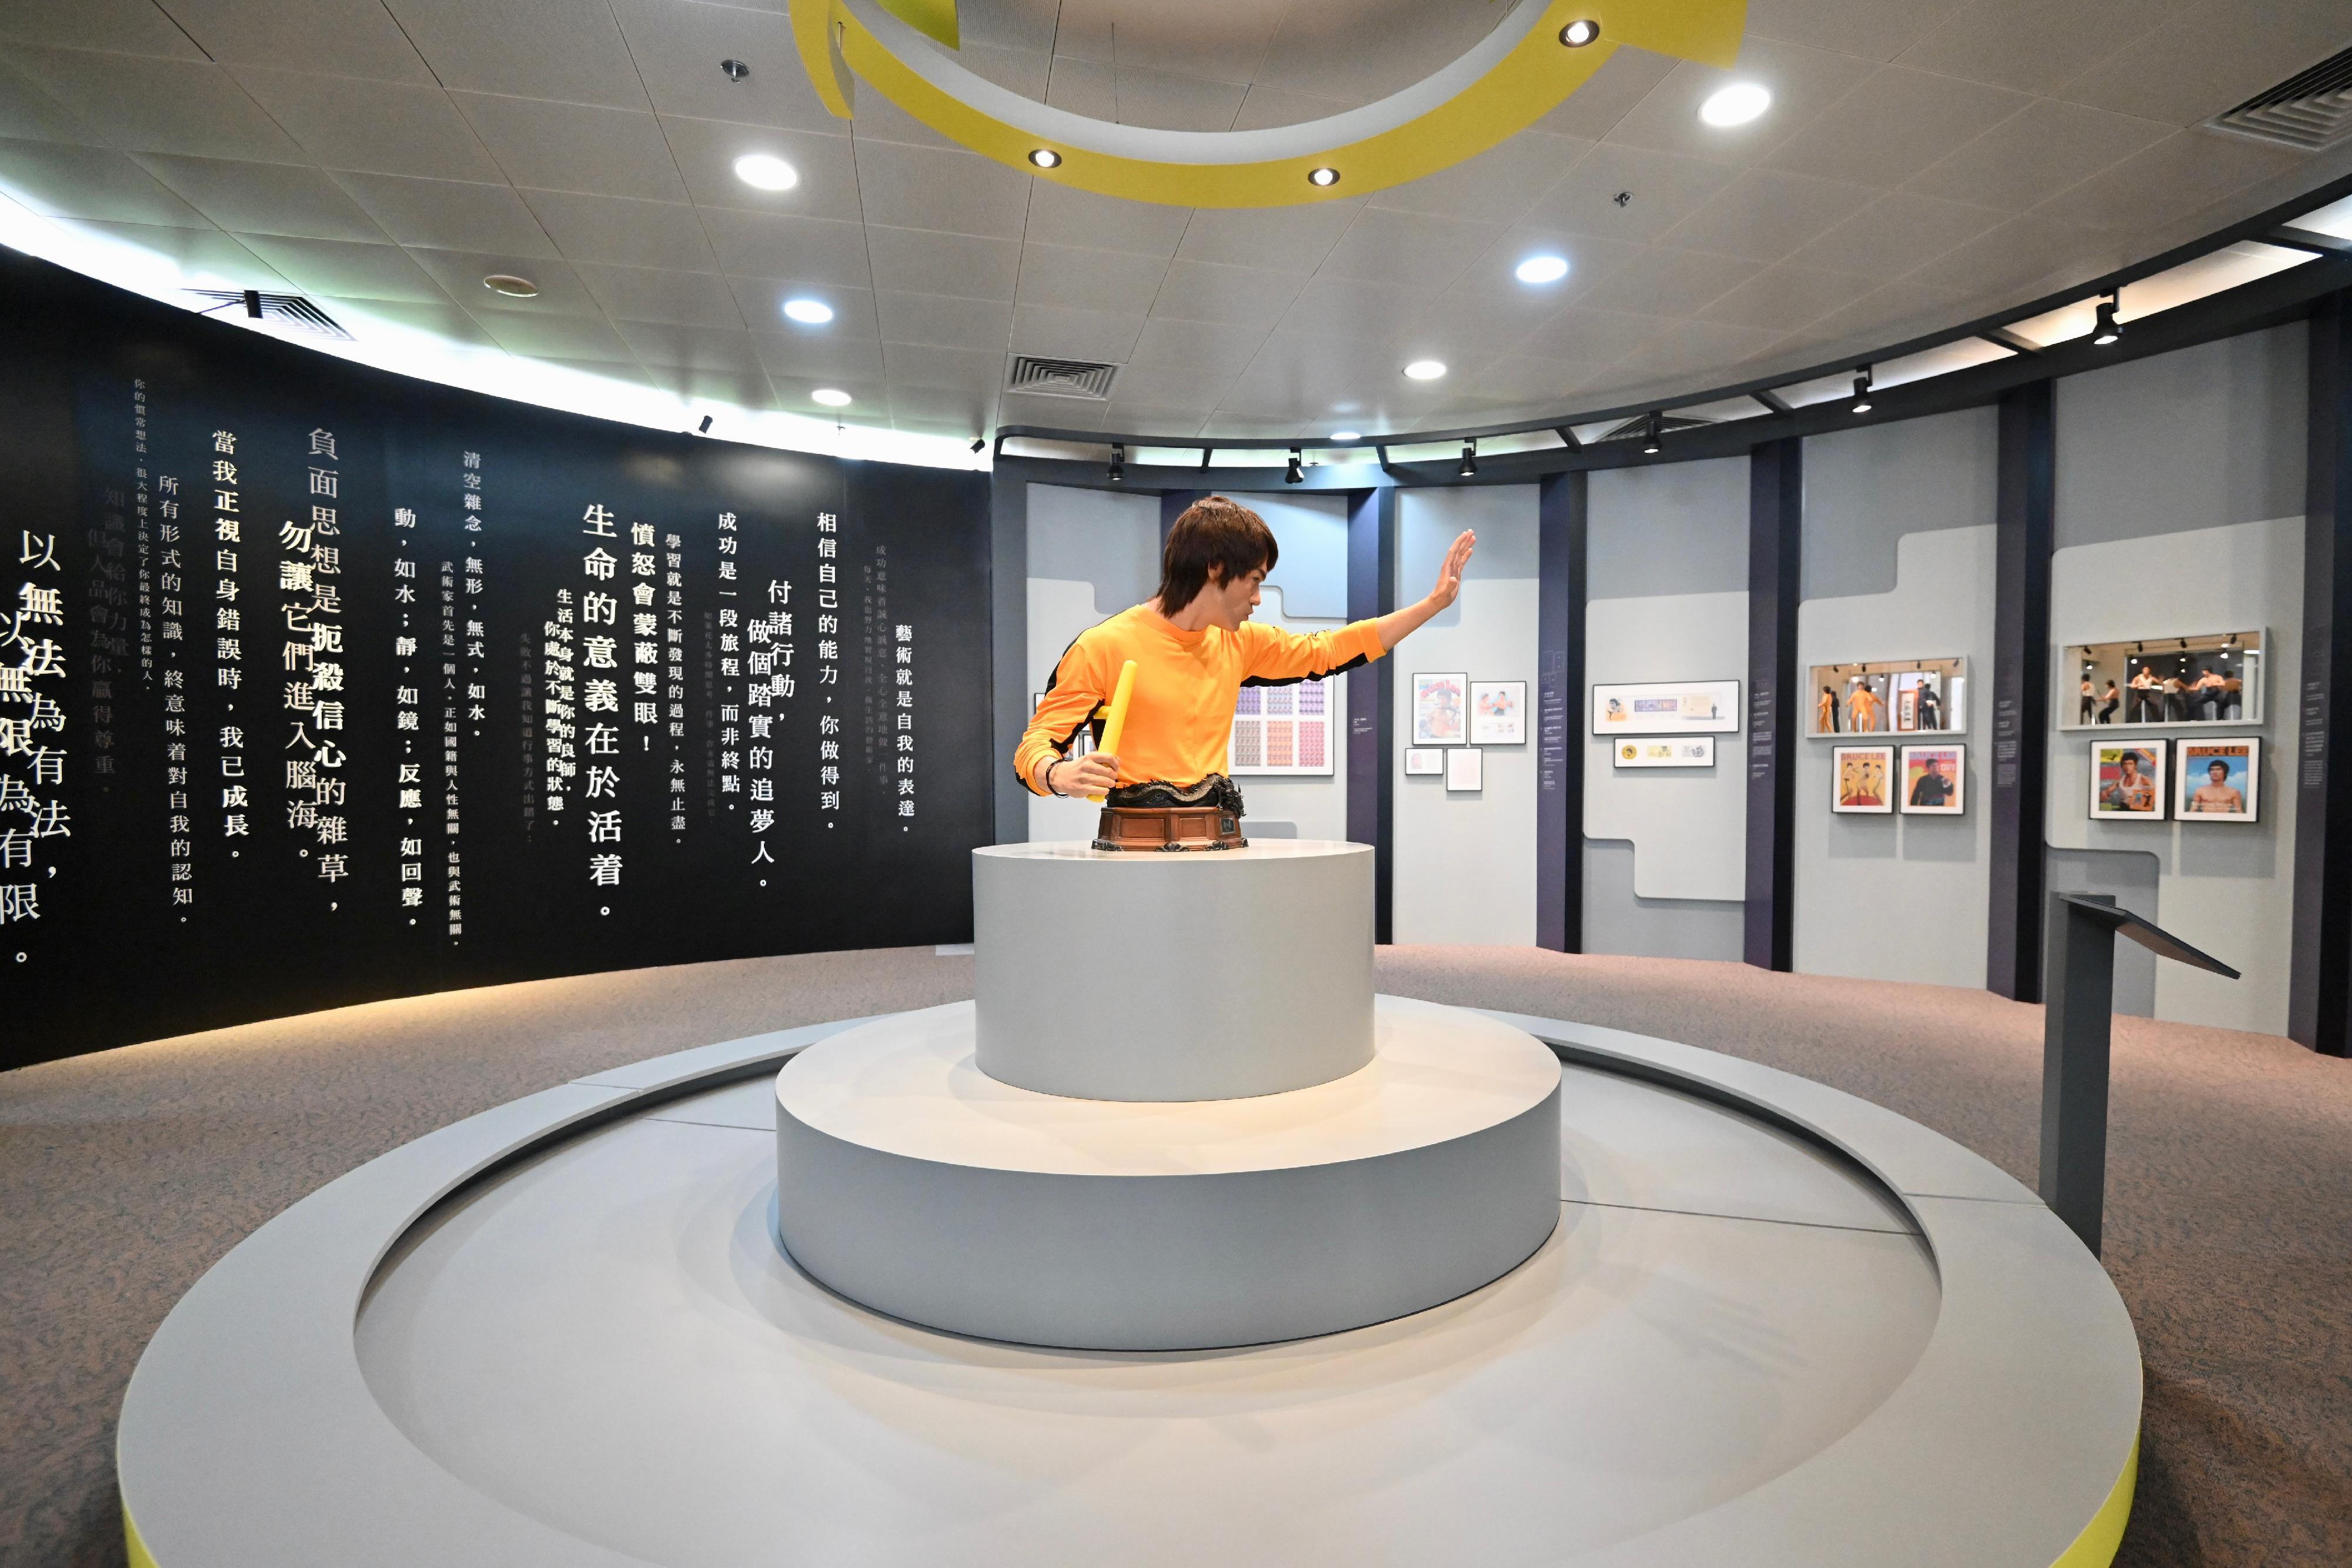 The pop-up display "Bruce Lee: a Timeless Classic" will be open to the public from tomorrow (July 12) at the Hong Kong Heritage Museum, showcasing some of the finest of Bruce Lee in popular culture, including publications, commemorative stamps and figures.